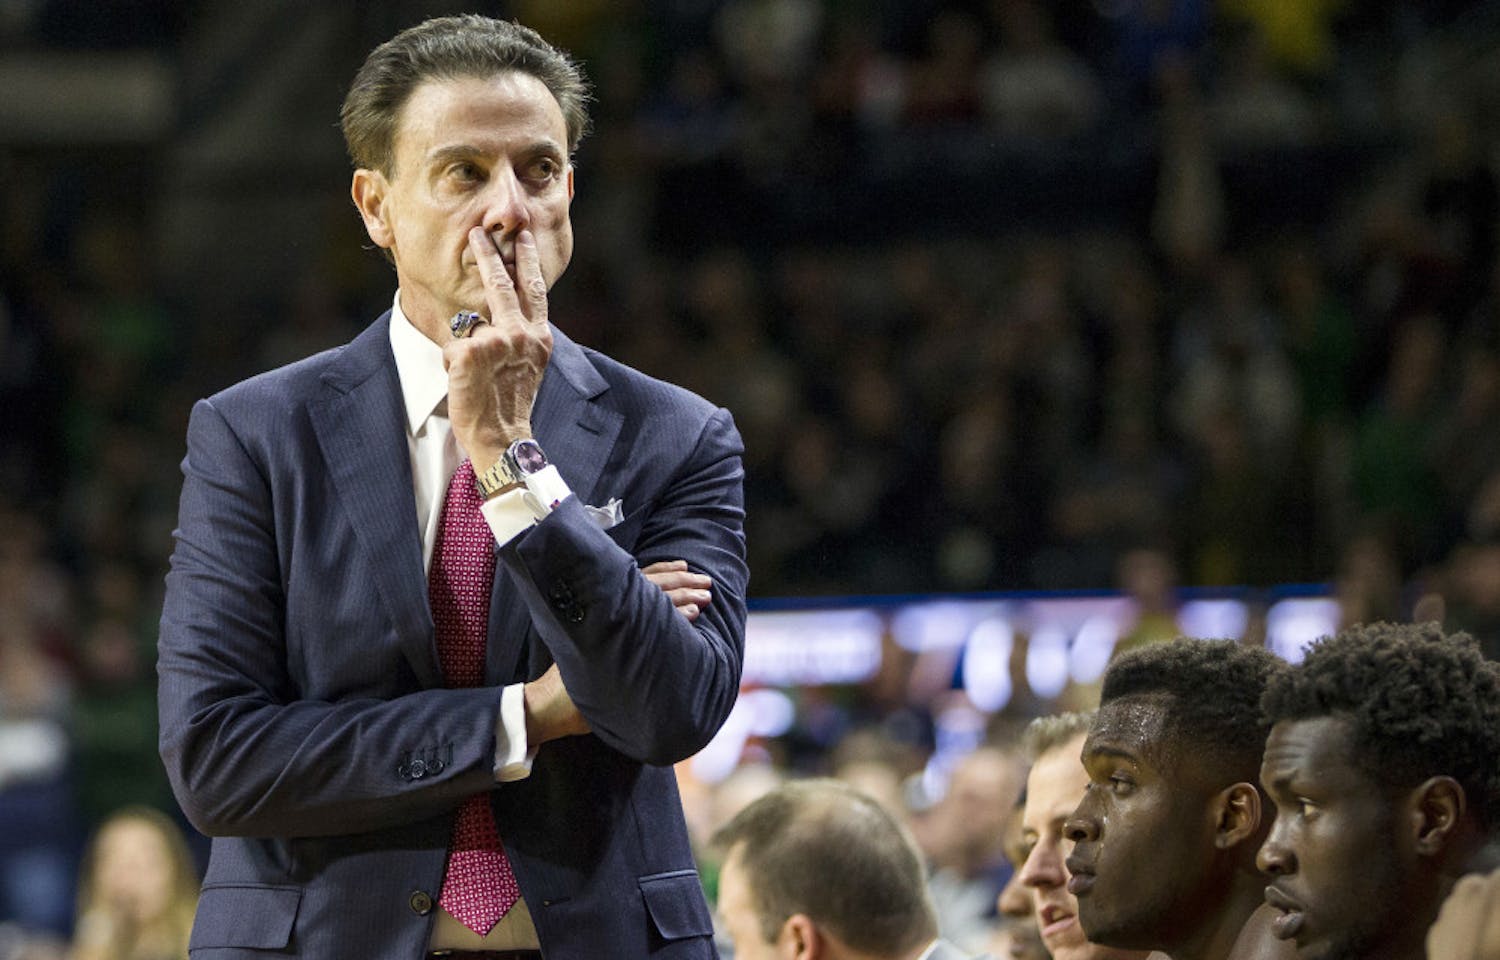 FILE - In this Jan. 4, 2017, file photo, Louisville head coach Rick Pitino looks on as his team falls behind late in the second half of an NCAA college basketball game against Notre Dame in South Bend, Ind.Louisville announced Wednesday, Sept. 27, 2017, that they have placed basketball coach Rick Pitino and athletic director Tom Jurich on administrative leave amid an FBI probe. (AP Photo/Robert Franklin, File)